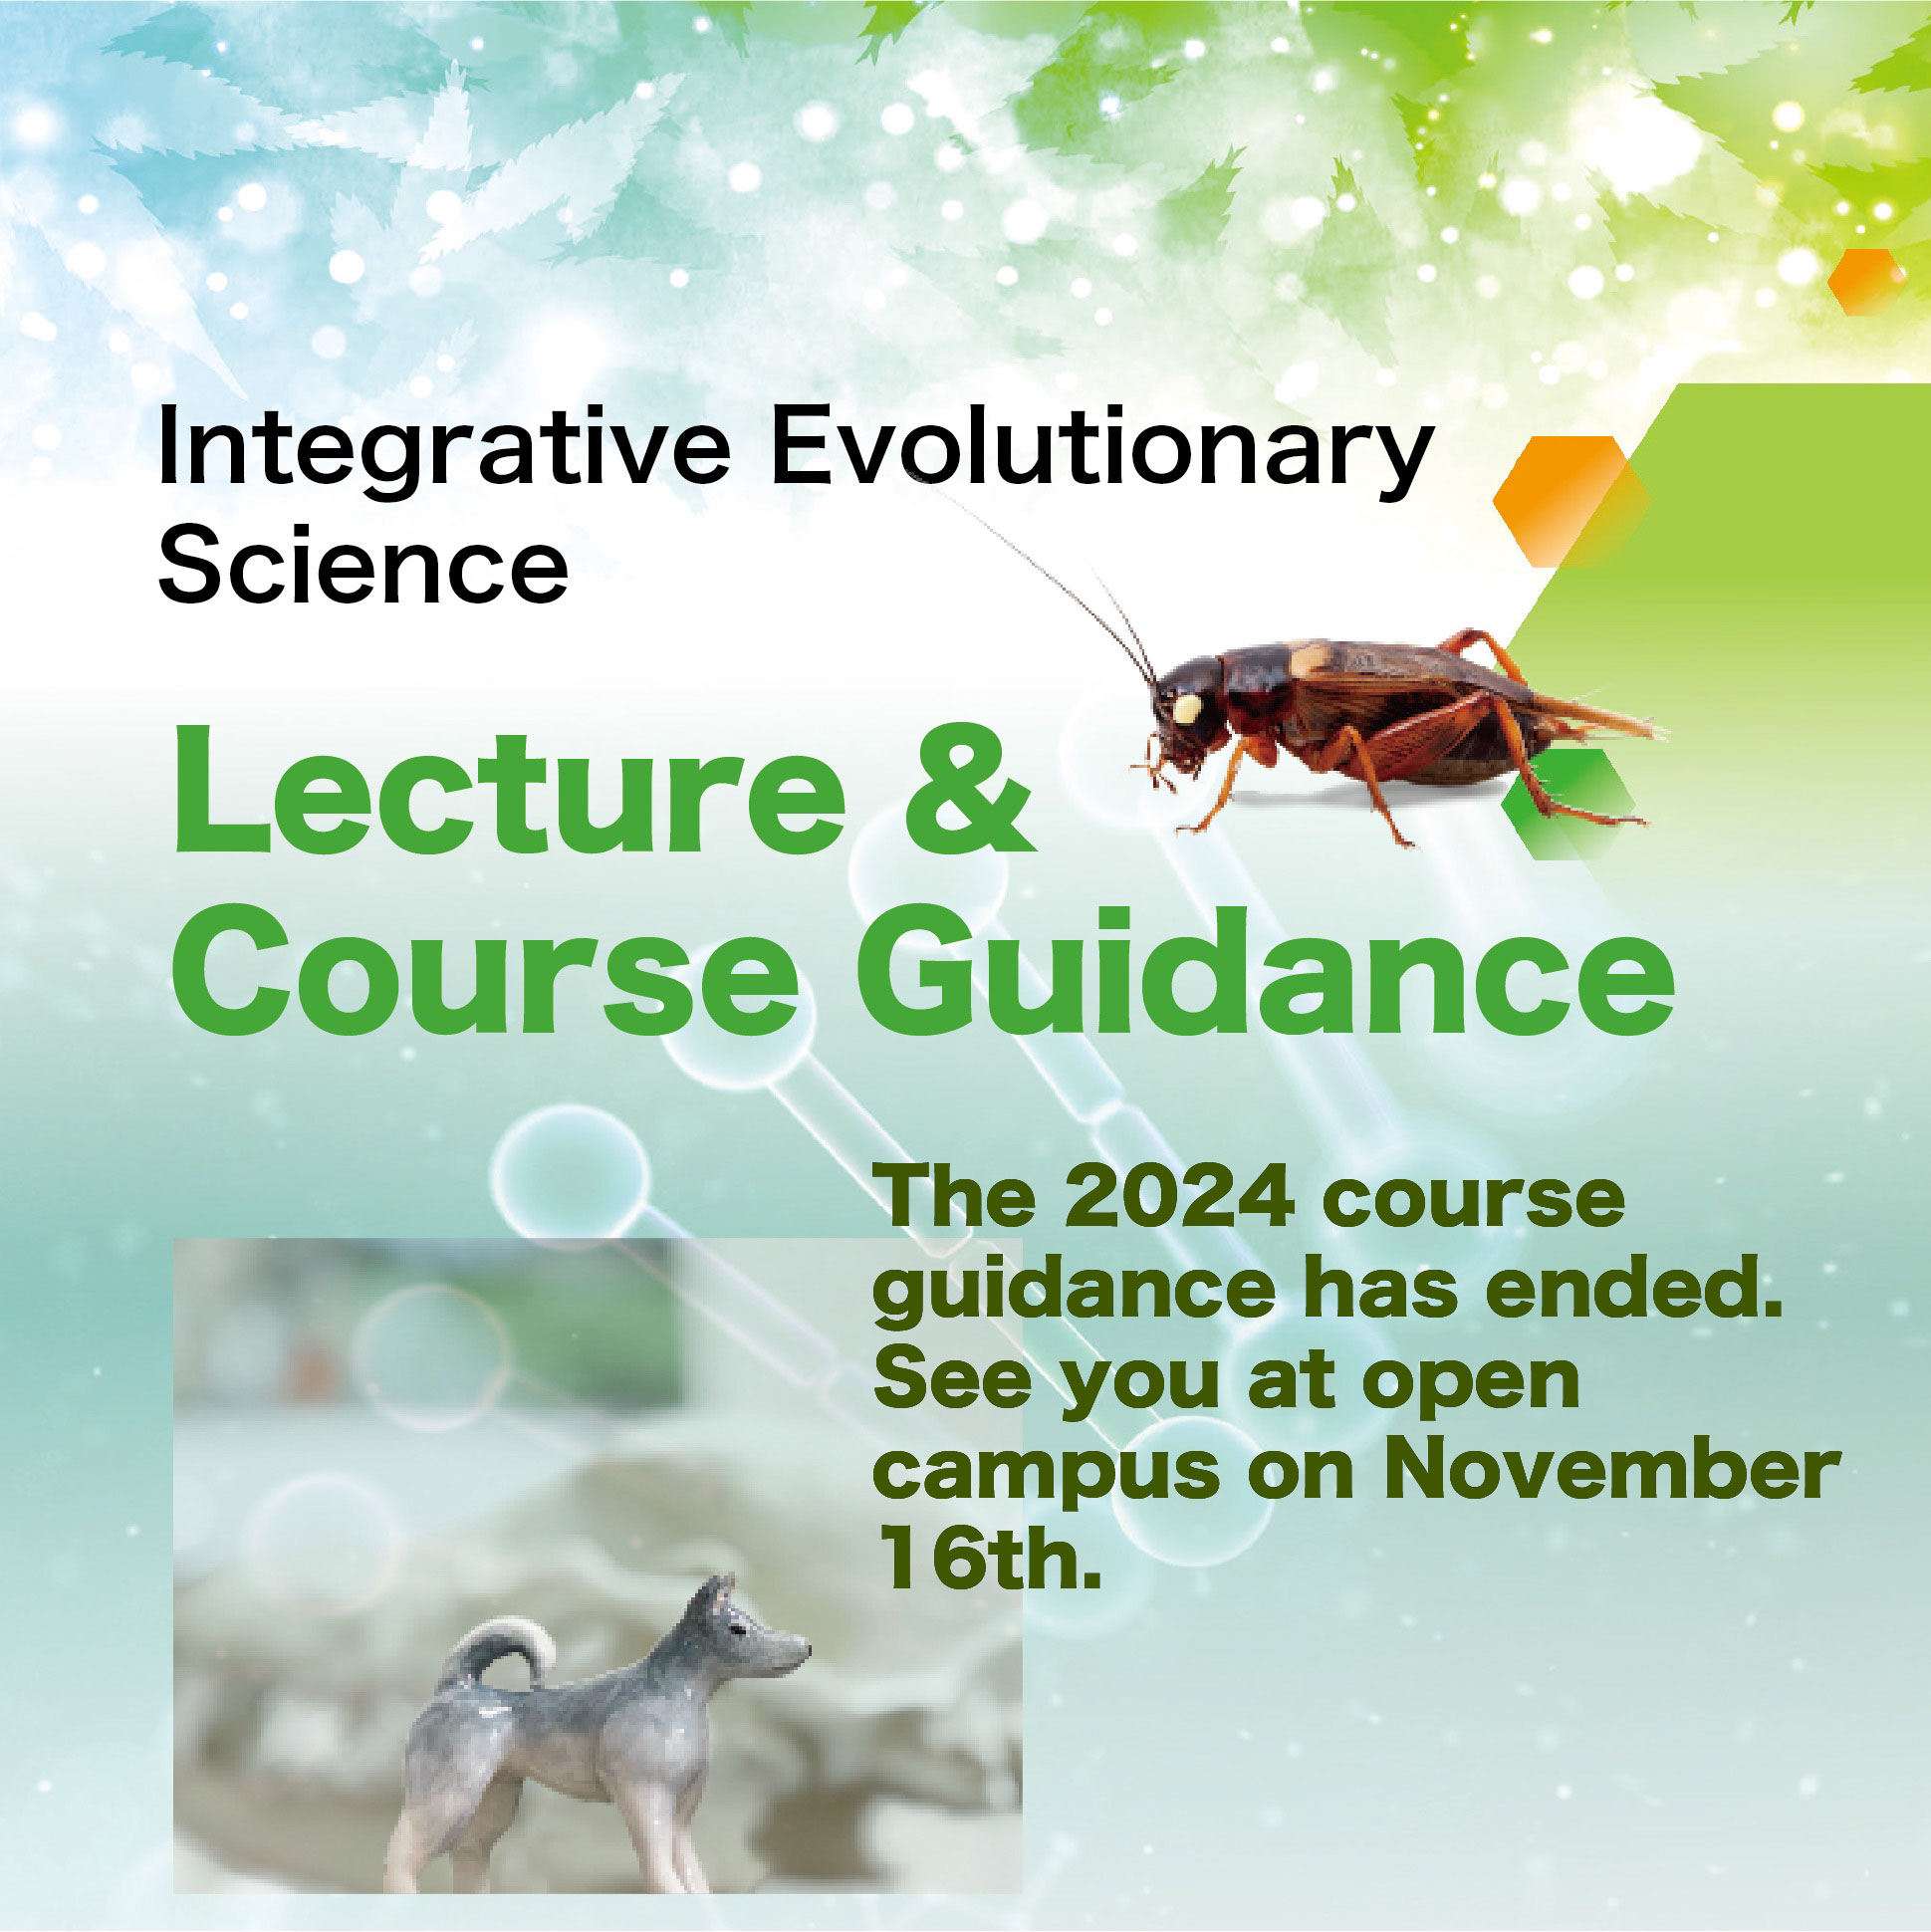 Lecture & Course guidance